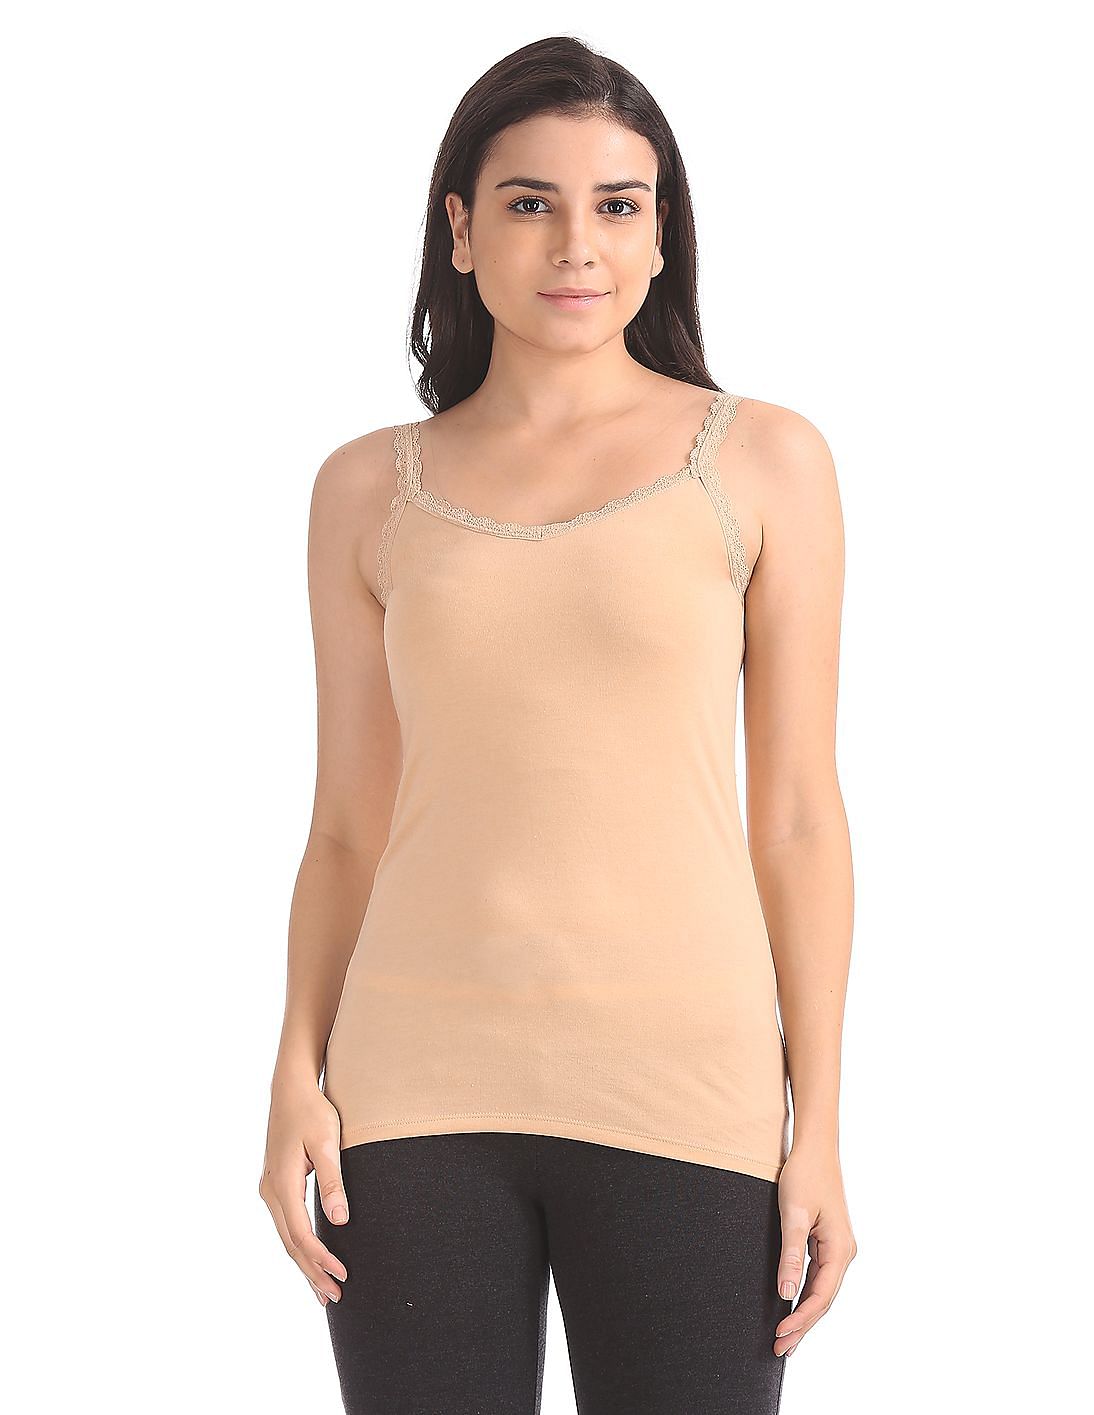 Buy Women Lace Trim Cotton Stretch Camisole online at NNNOW.com